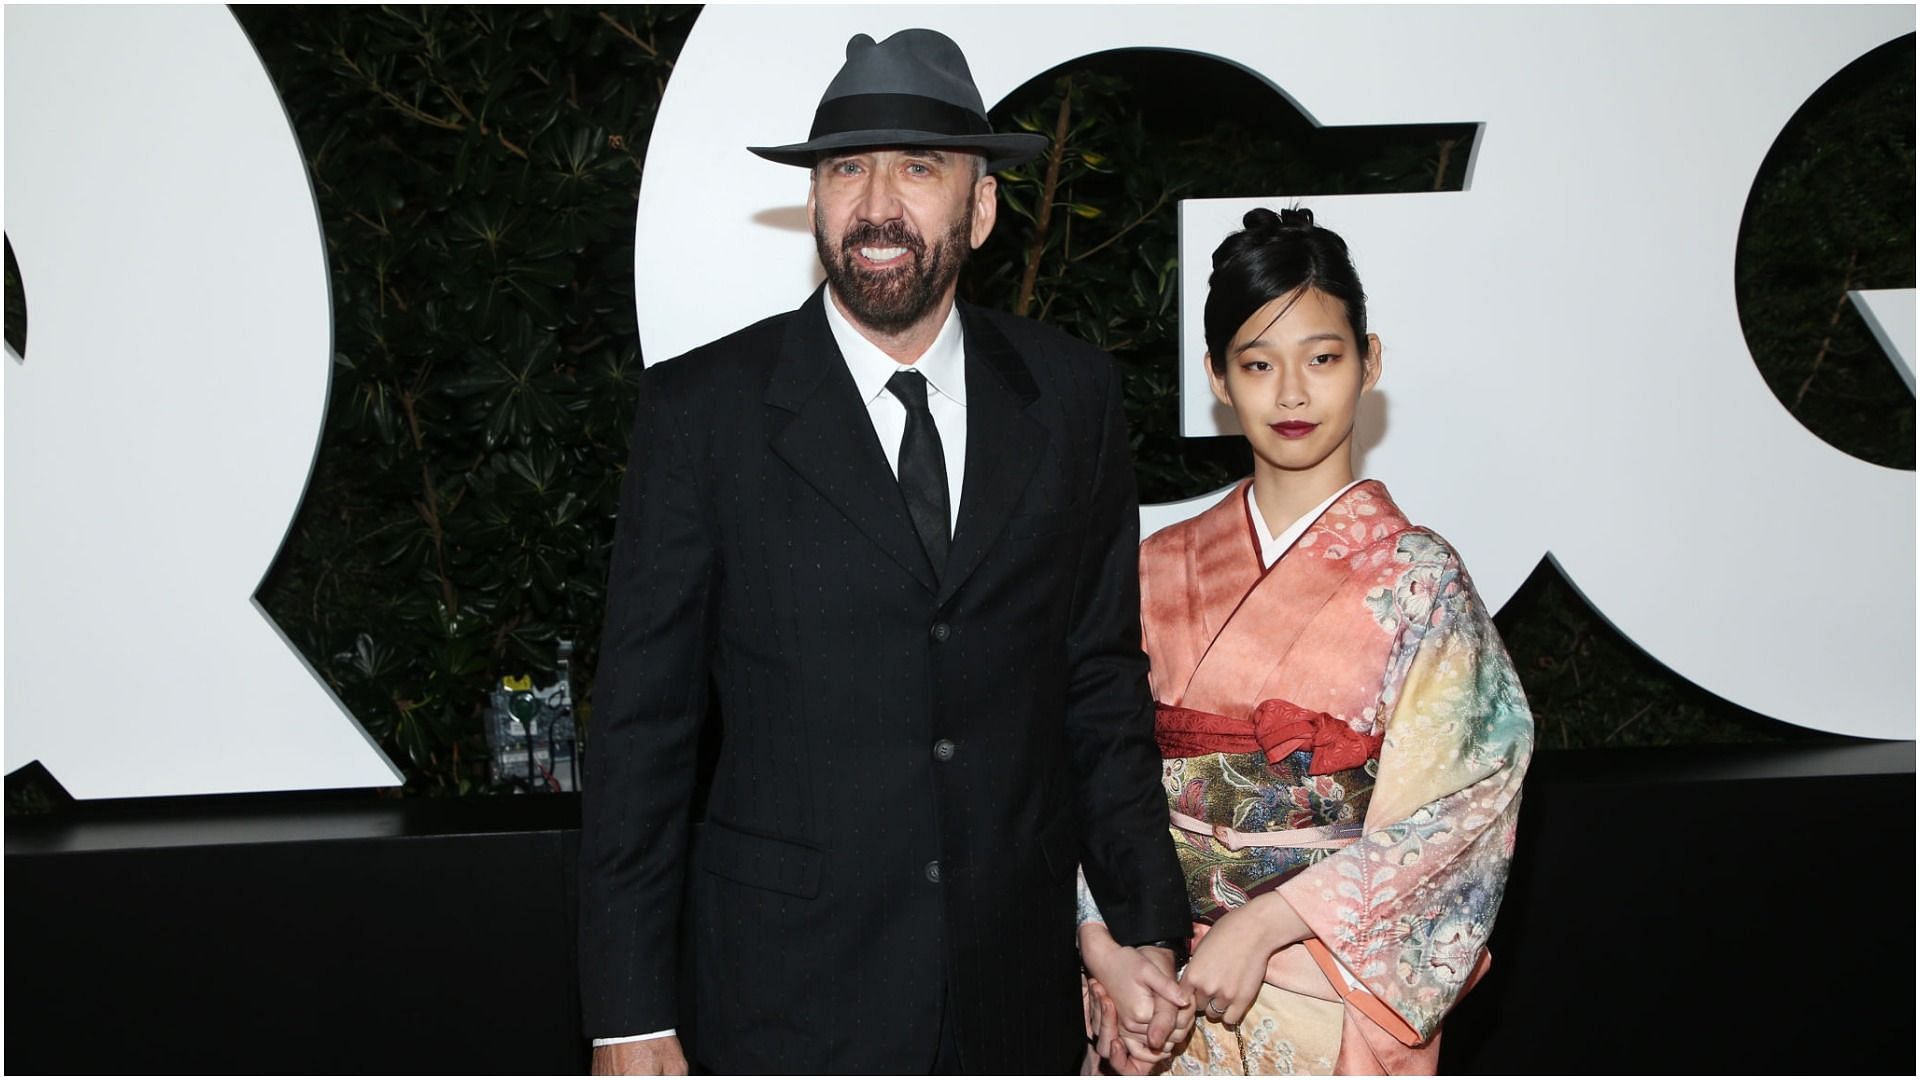 Nicolas Cage and Riko Shibata were recently spotted at the JFK Airport (Image by Phillip Faraone via Getty Images)